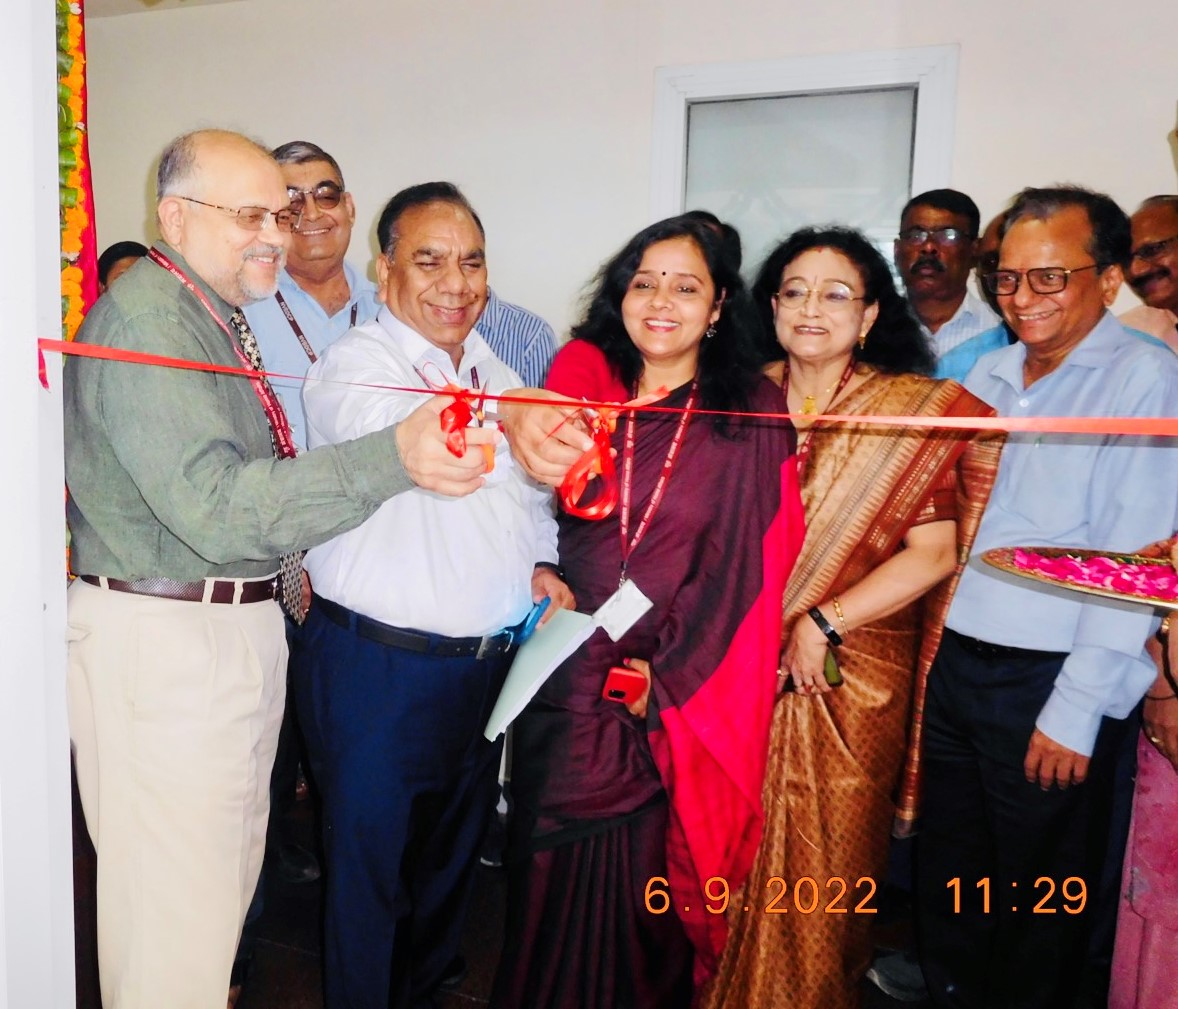 Inauguration of National Reference Laboratory
at National Center for Vector Borne Diseases Control, Delhi on 6th September 2022